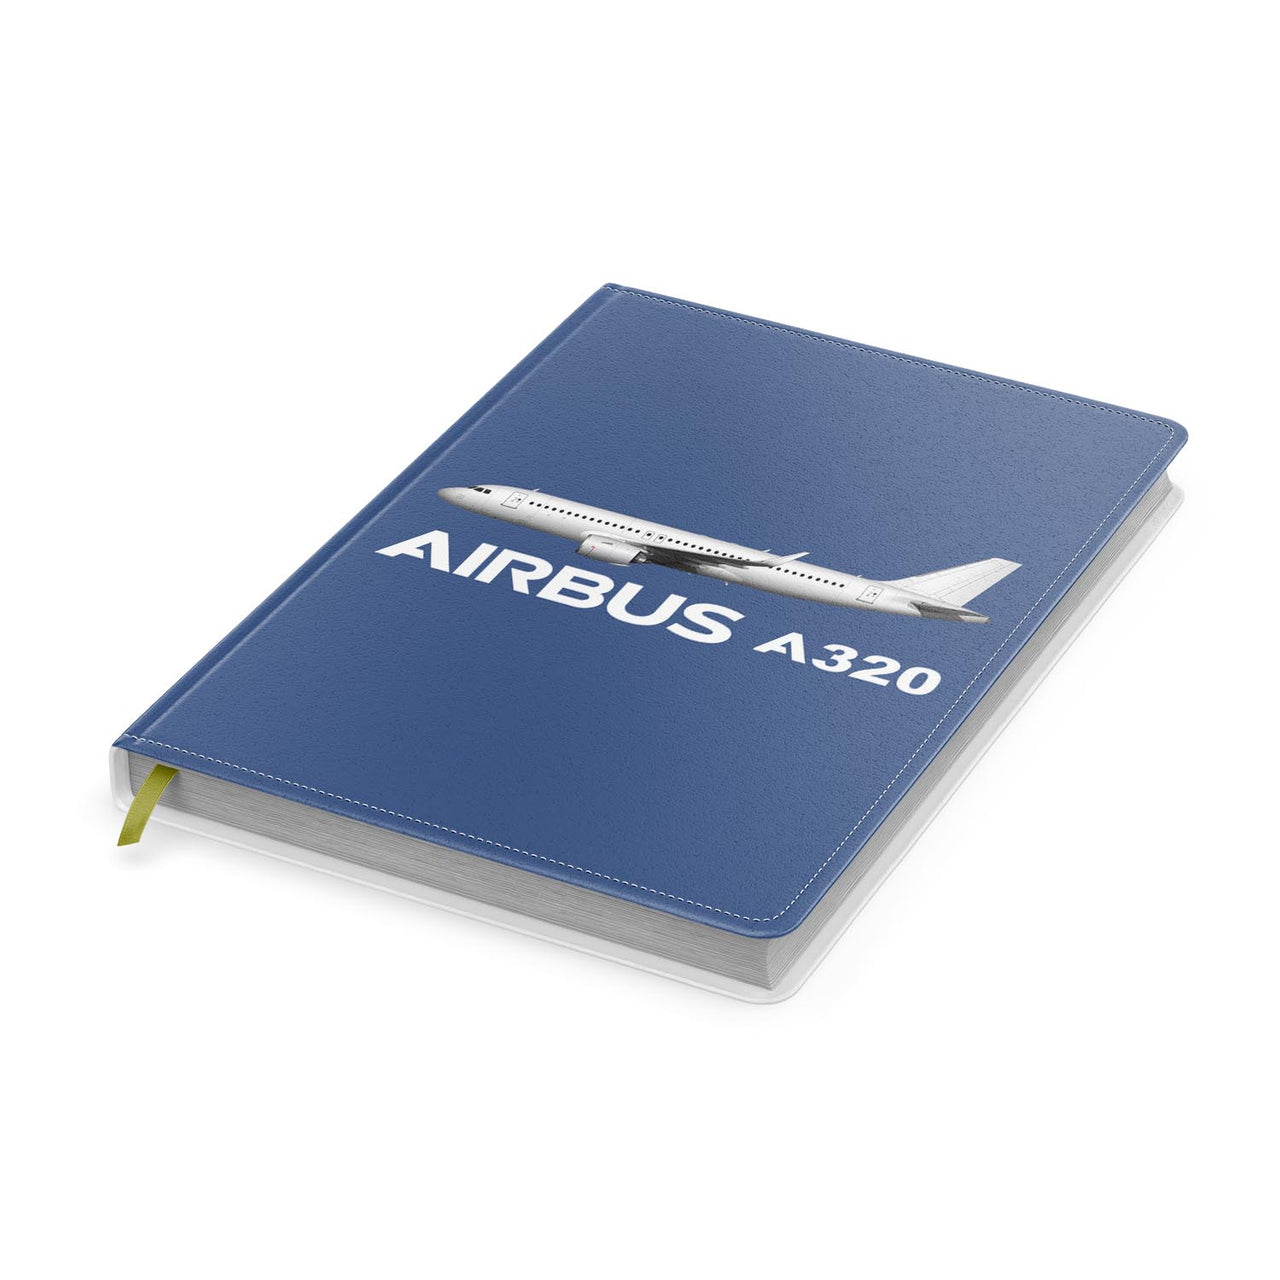 The Airbus A320 Designed Notebooks